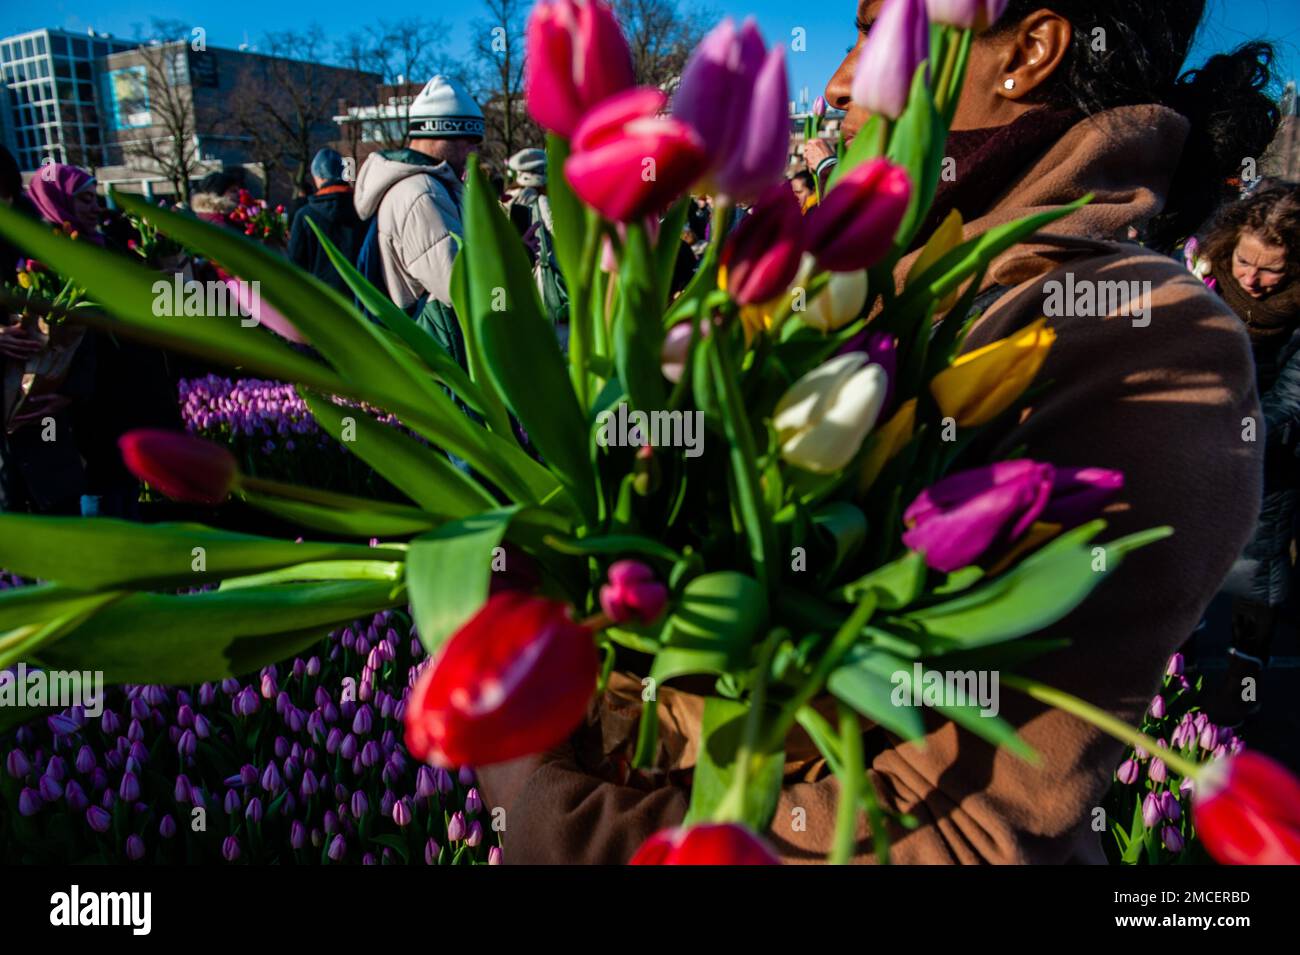 A woman seen walking with a bunch of colorful tulips. Each year on the 3rd Saturday of January, the National Tulip Day is celebrated in Amsterdam. Dutch tulip growers built a huge picking garden with more than 200,000 colorful tulips at the Museumplein in Amsterdam. Visitors are allowed to pick tulips for free. The event was opened by Olympic skating champion, Irene Schouten. Prior to the opening, she christened a new tulip: Tulipa 'Dutch Pearl' as a reference to the world - famous painting 'The girl with a pearl earring' by Johannes Vermeer. Stock Photo